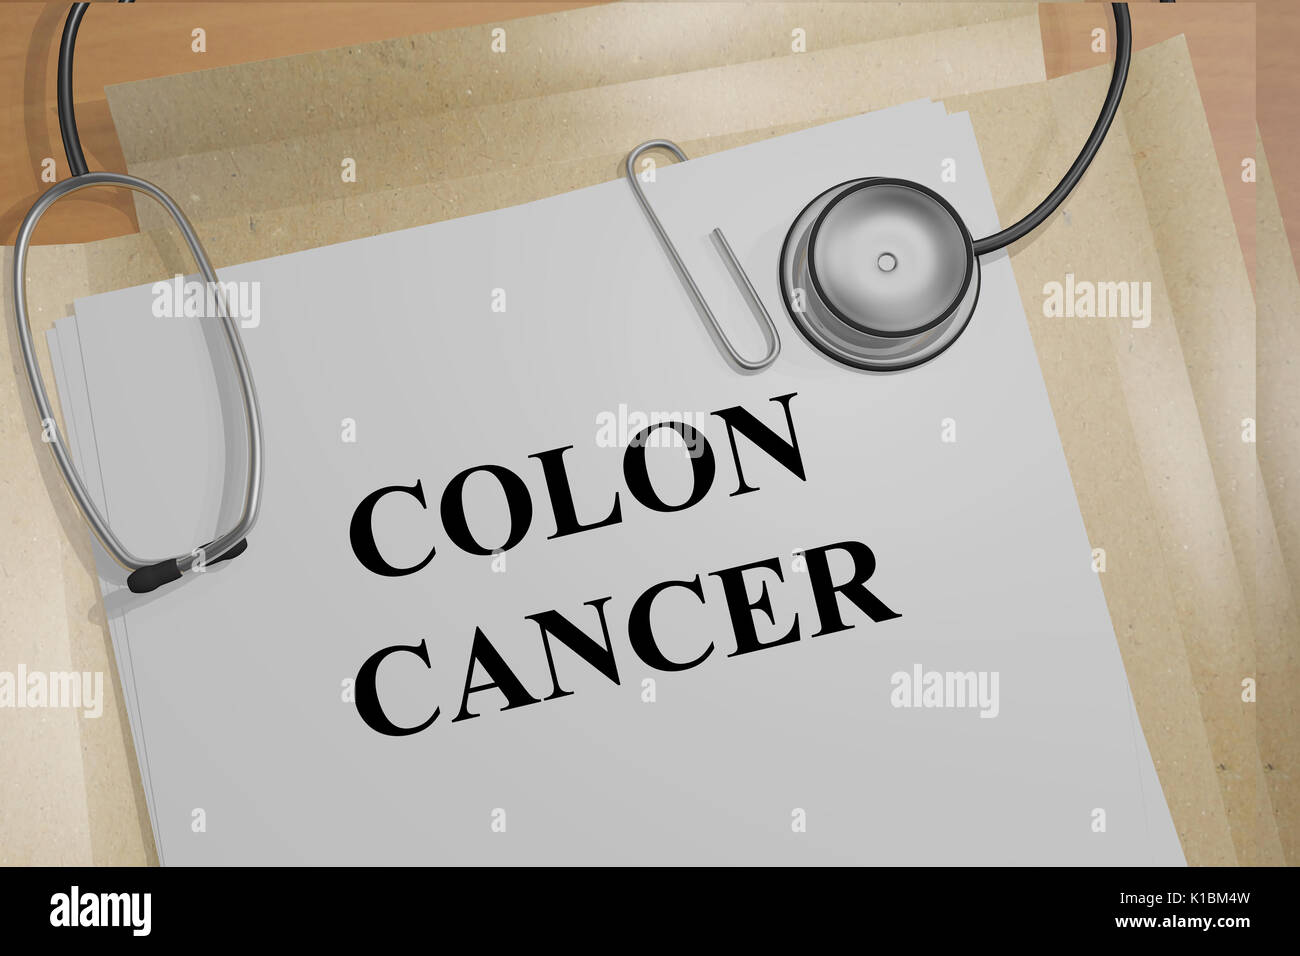 Render illustration of Colon Cancer title on medical documents Stock Photo